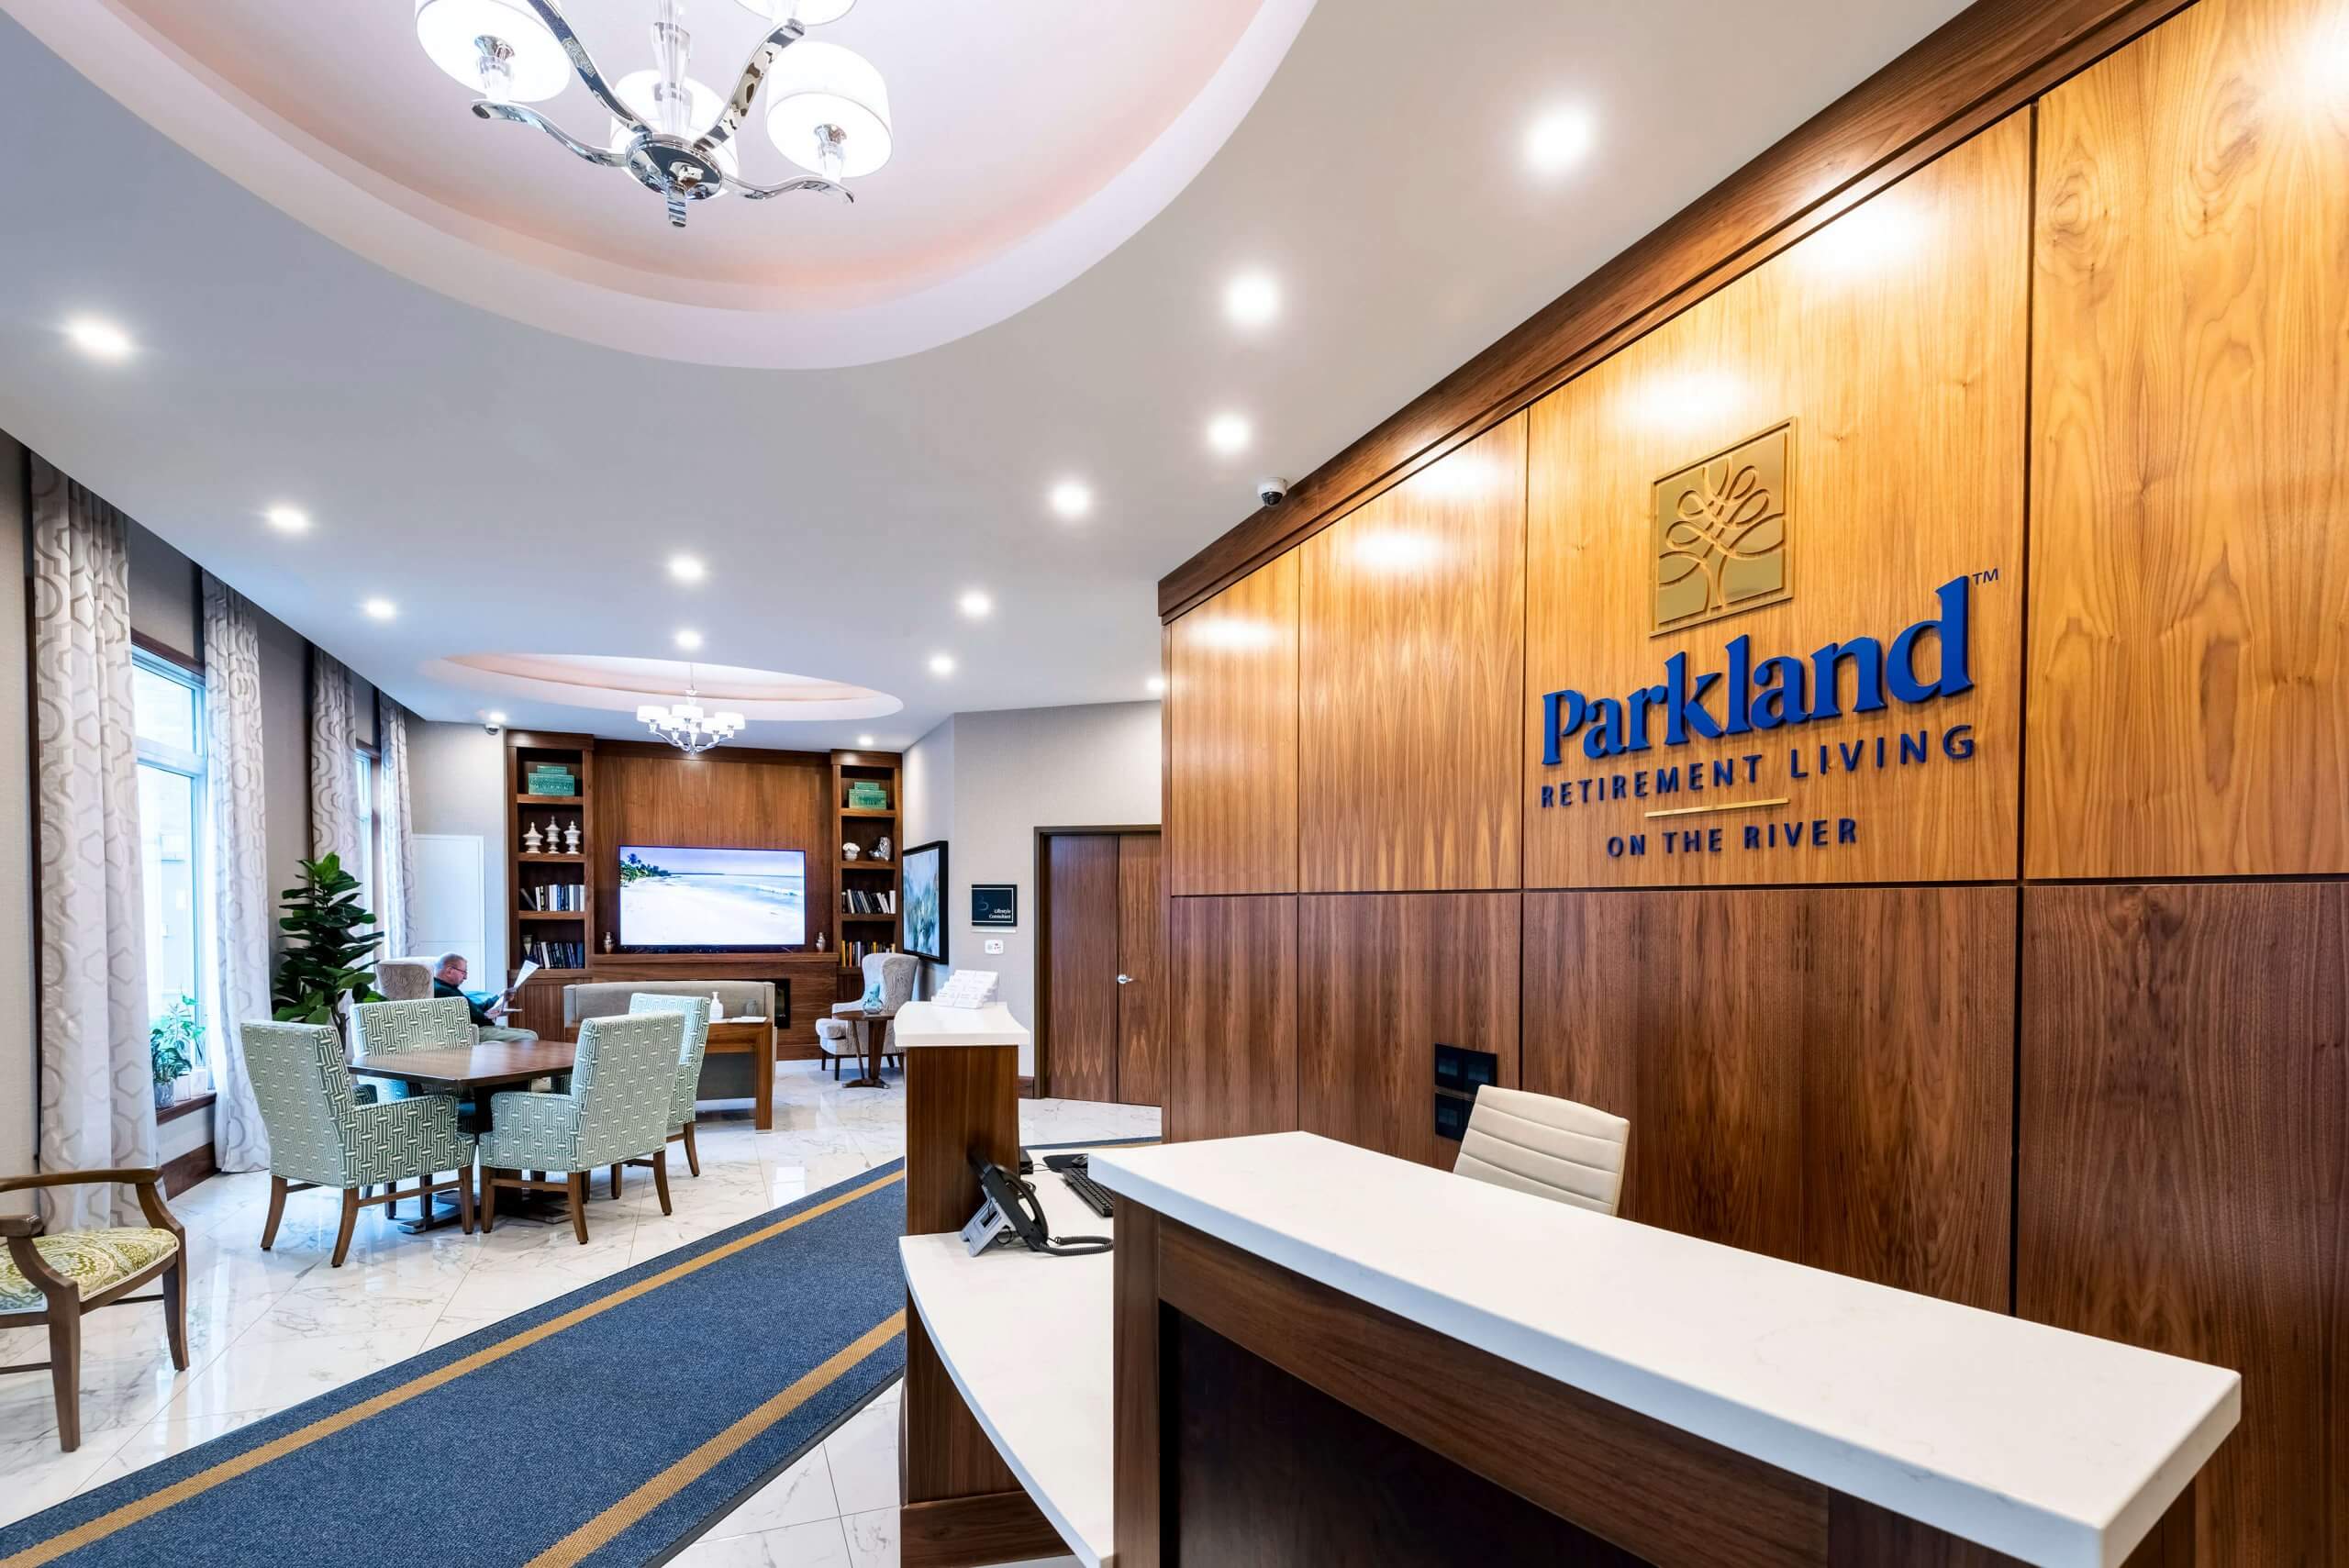 Lobby of Parkland Residence with wooden front desk in front of Parkland sign on wall and surrounding furniture with table and television